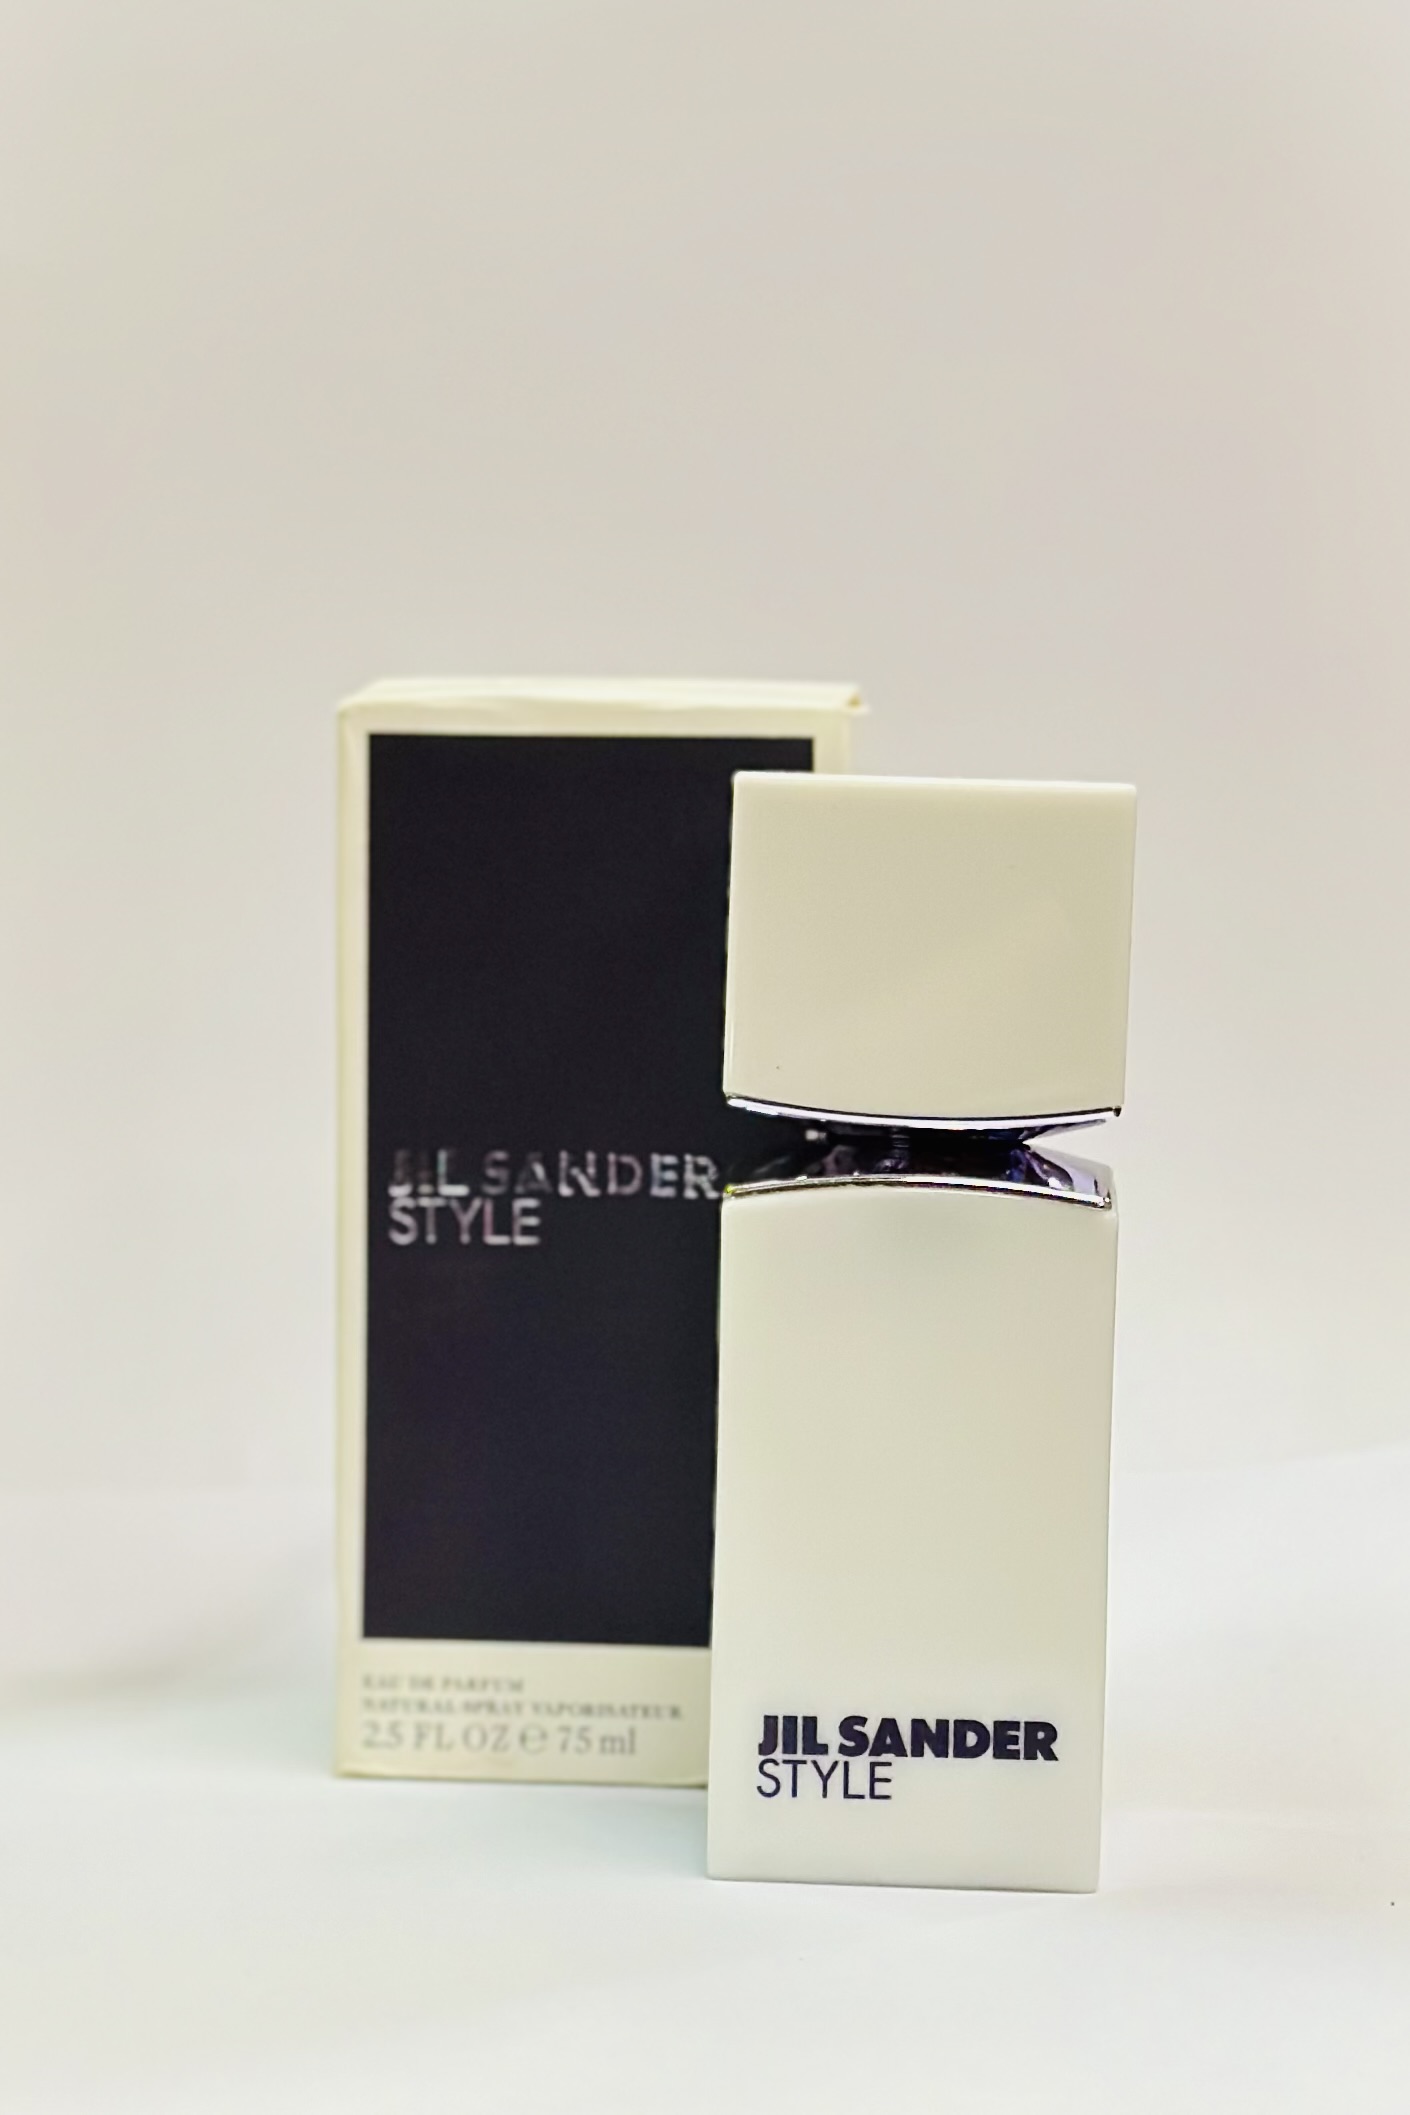 Jil Sander Style 75ml - Perfumes Of The Past